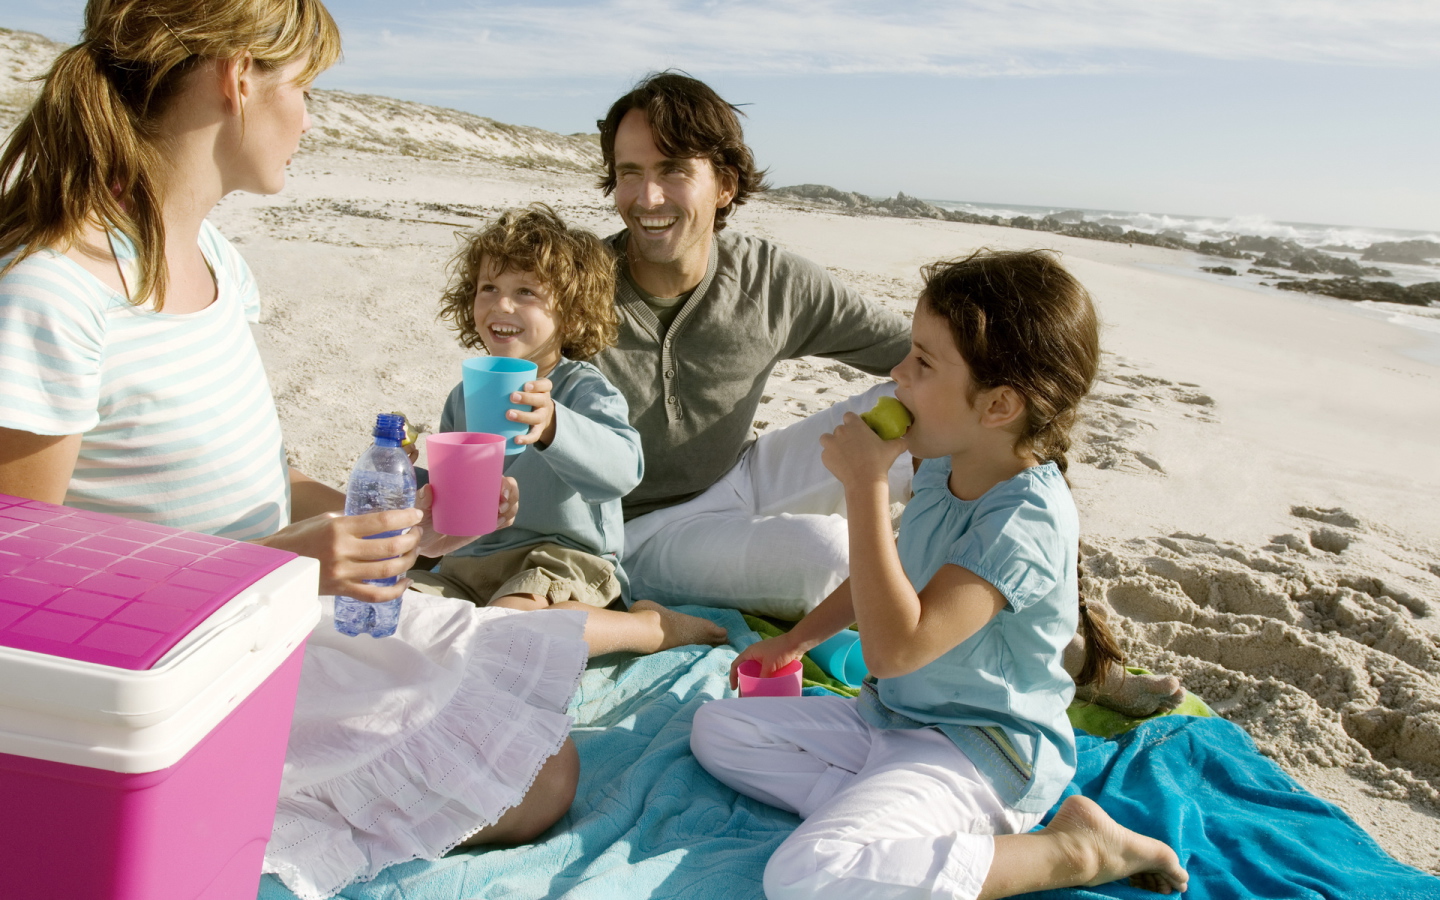 Picnic on the beach with family